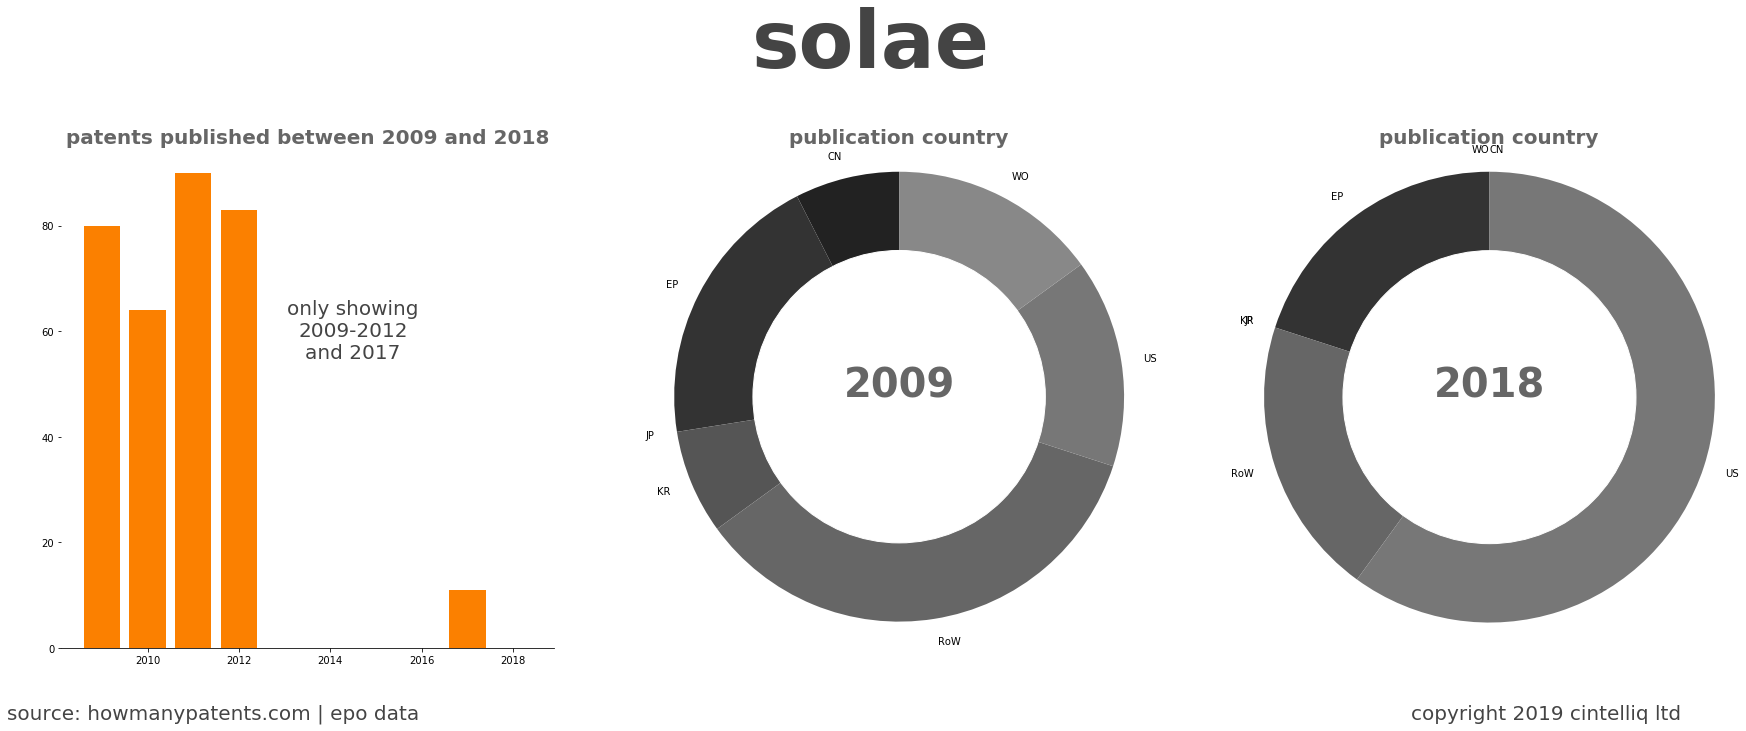 summary of patents for Solae